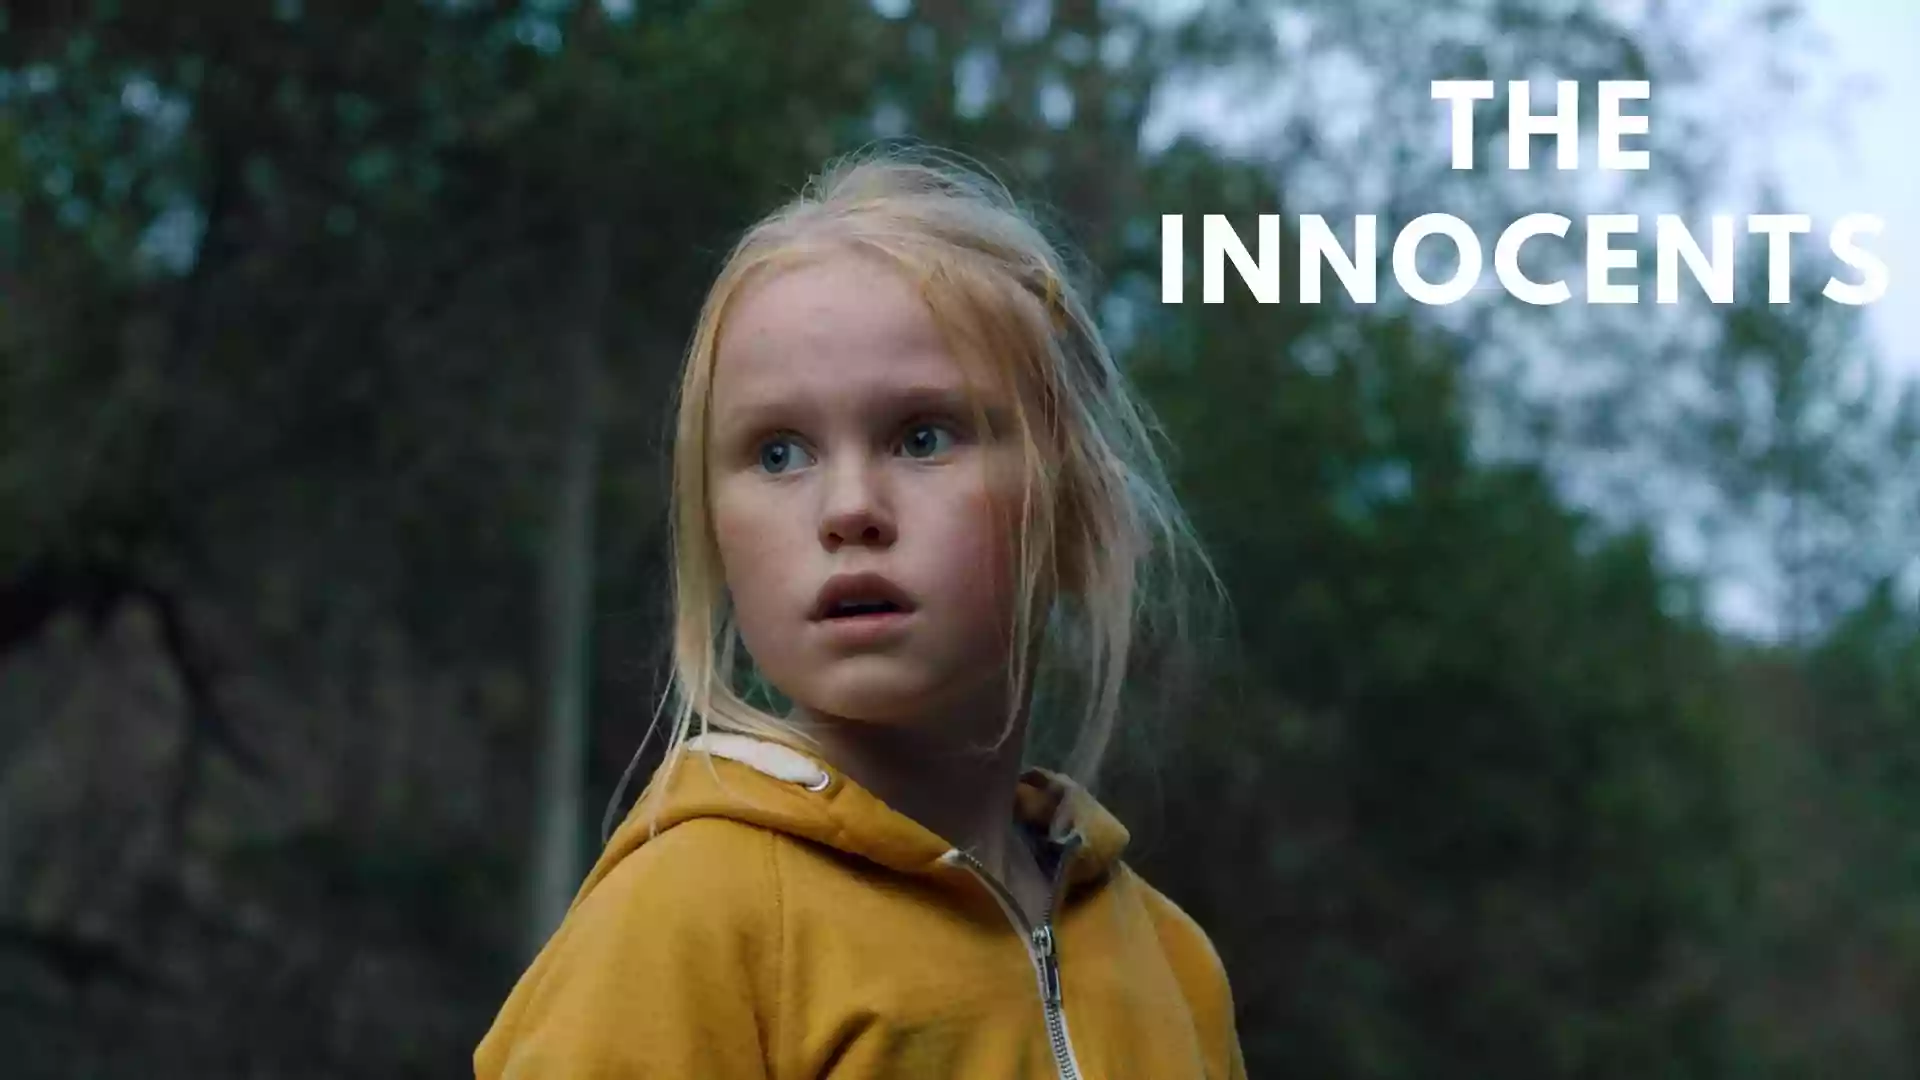 The Innocents Parents guide | The Innocents Age Rating | 2022